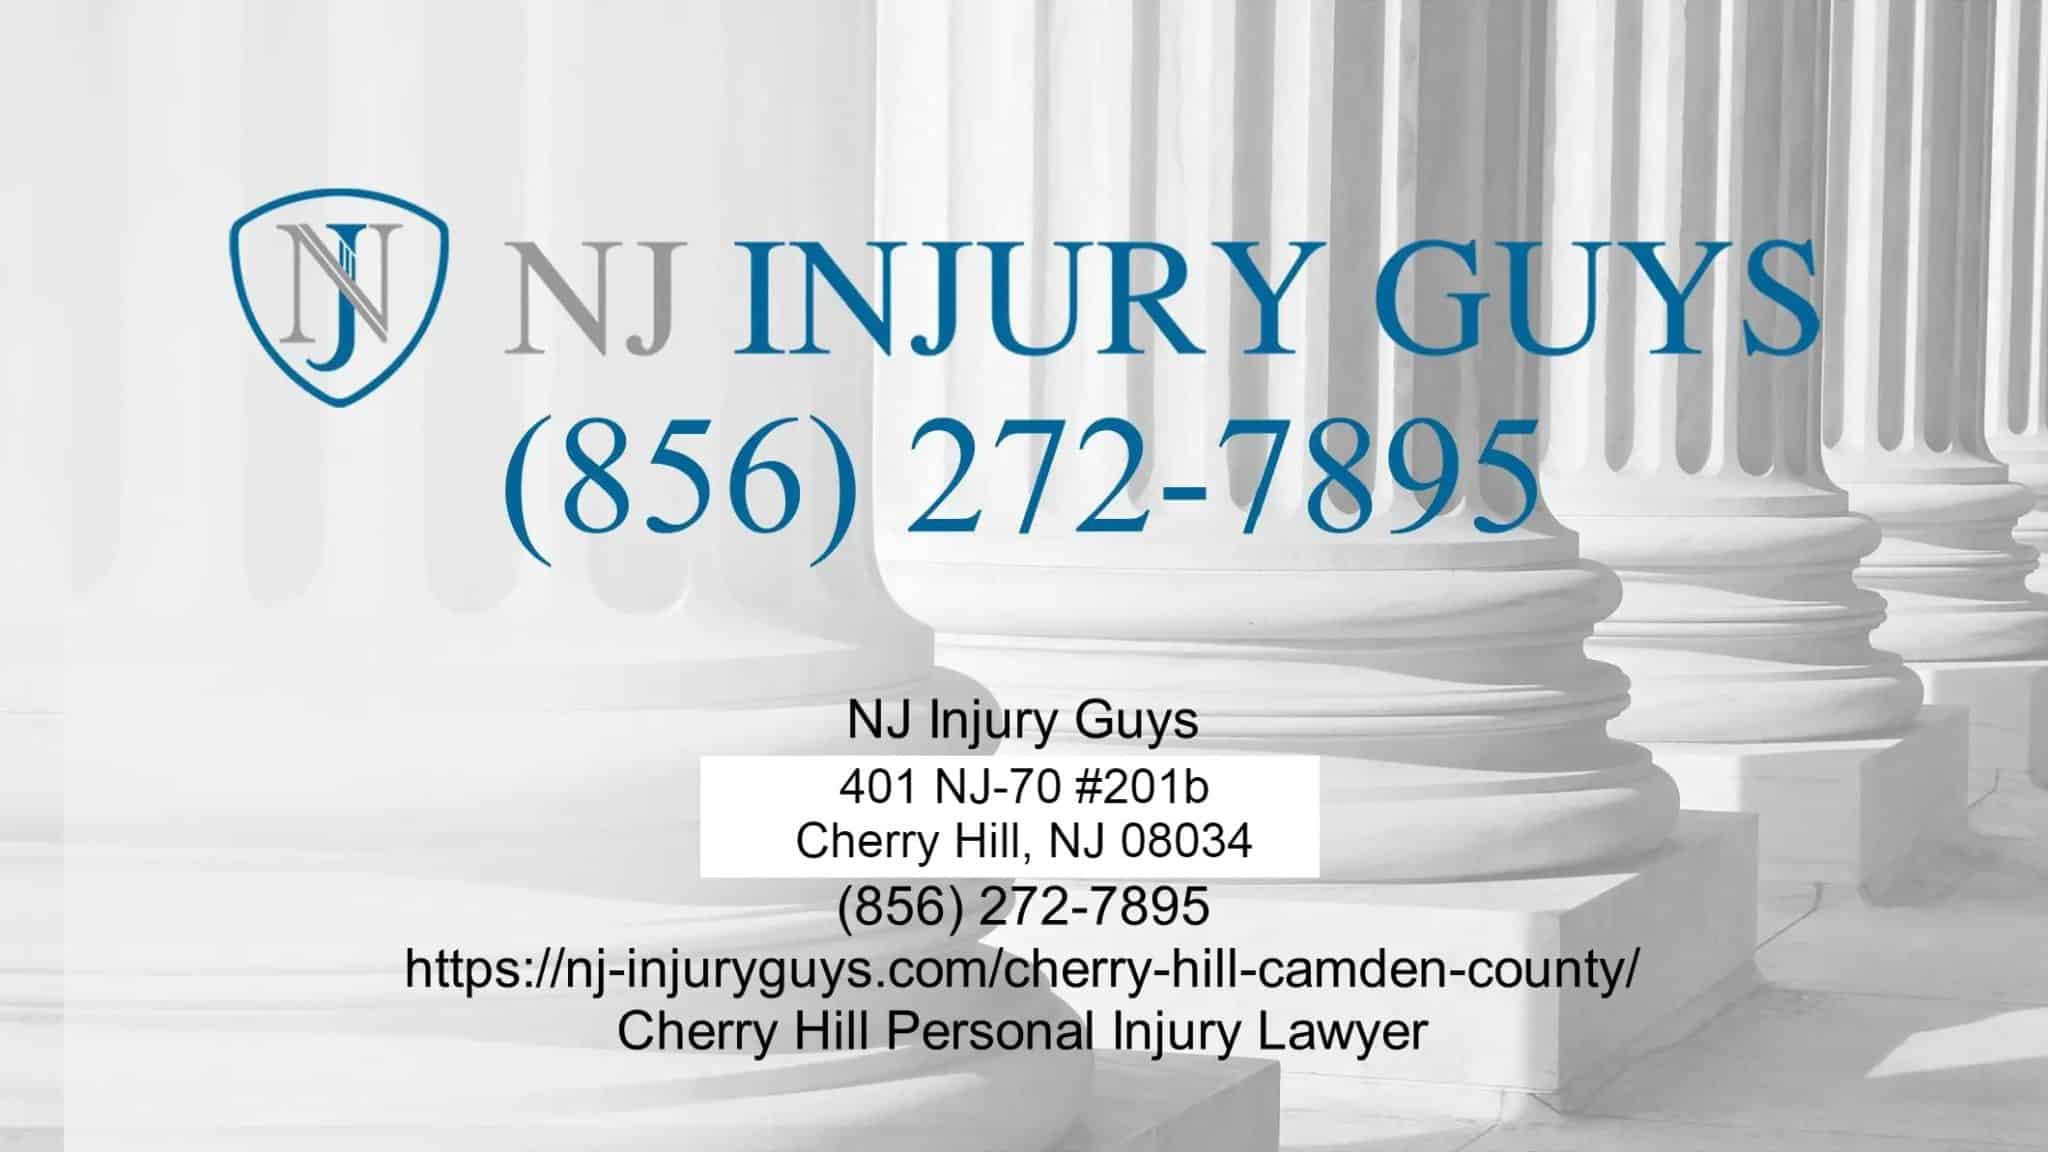 Best Birth Injury Lawyers In Cherry Hill Get Justice For Cerebral Palsy Victims